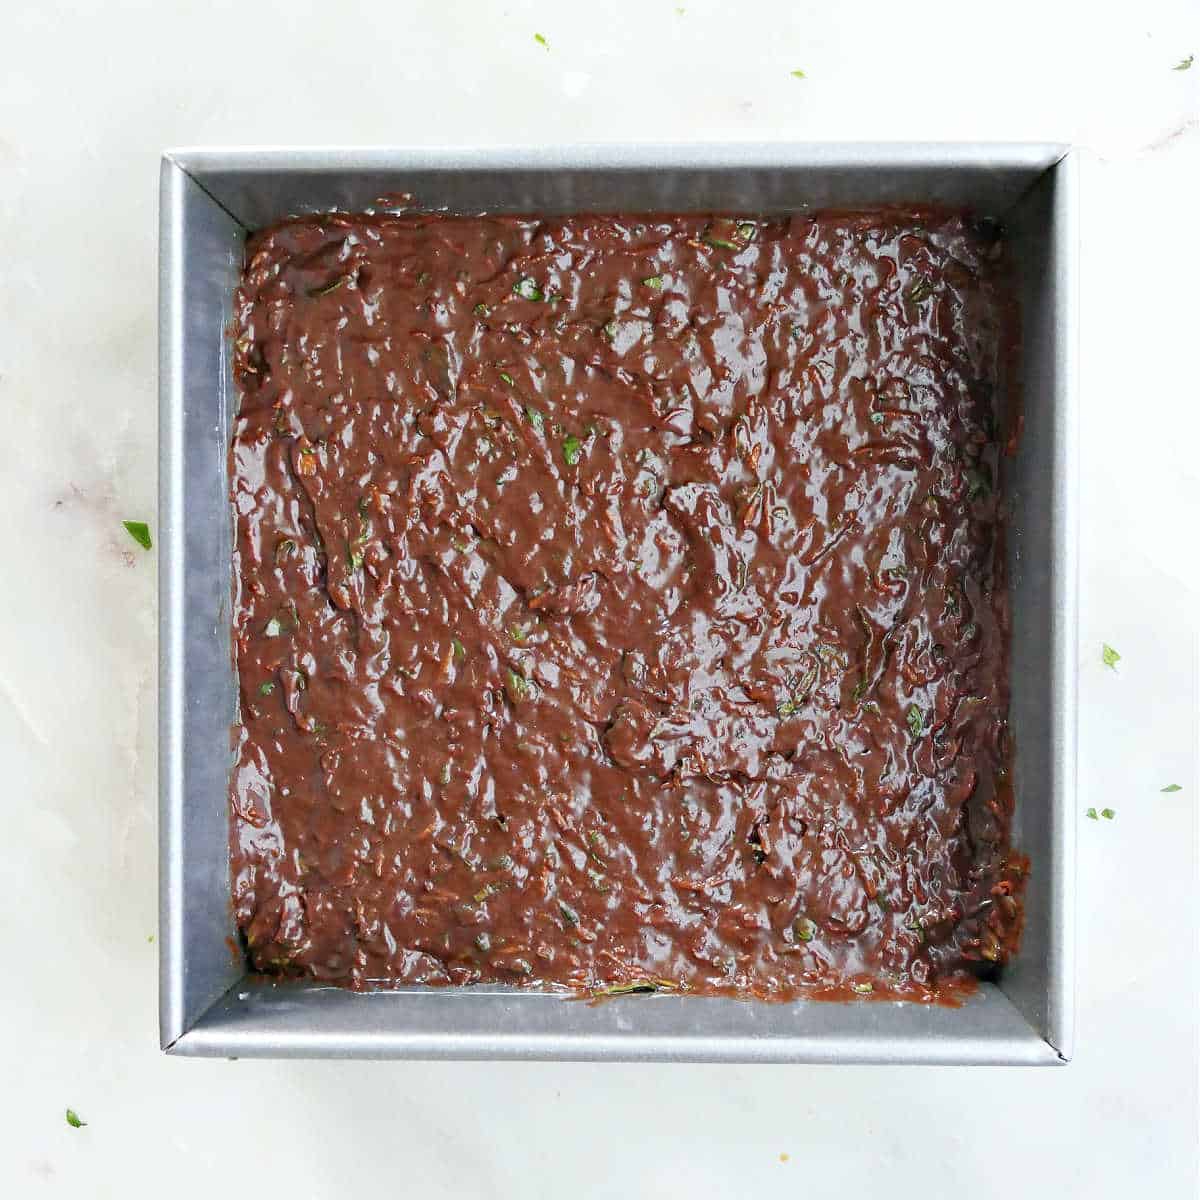 veggie brownie batter spread out in a baking dish on a counter before baking